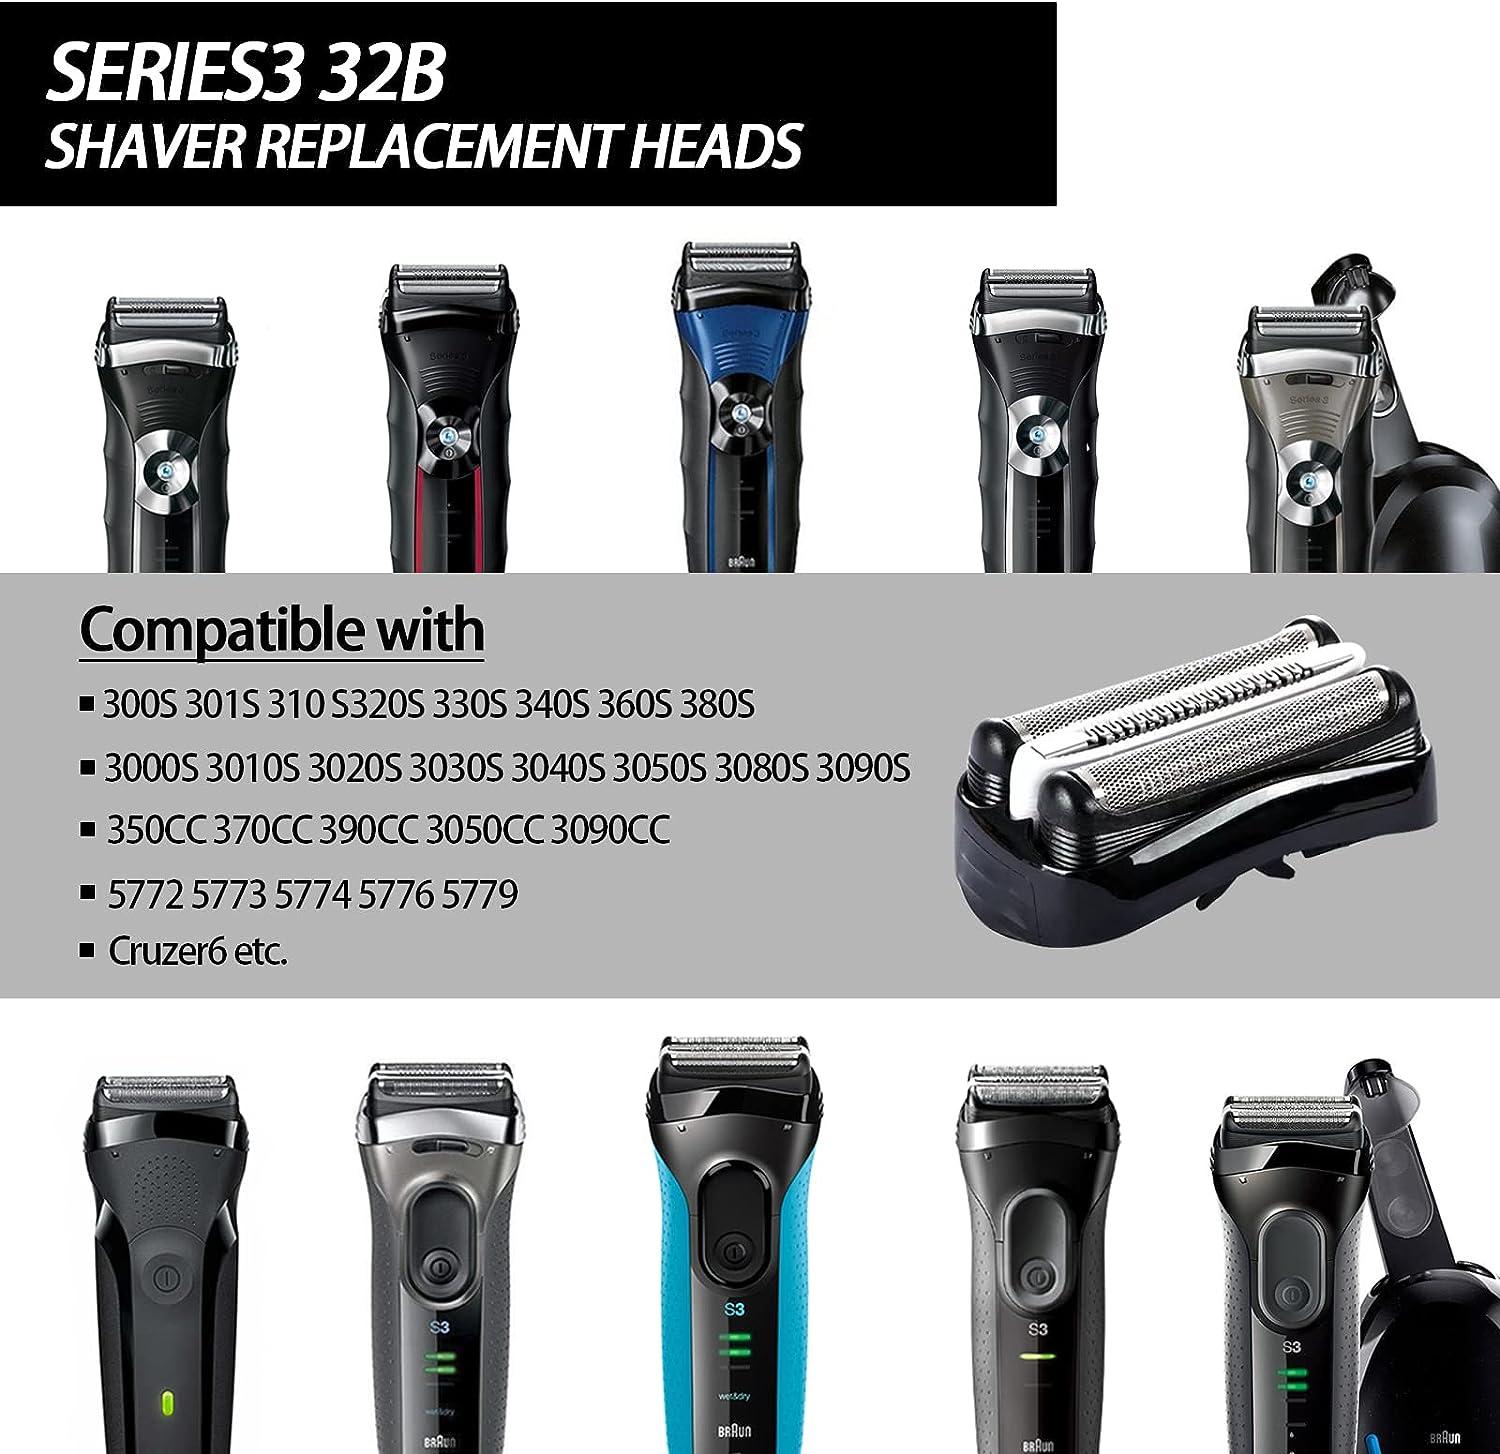 32B S3 Electric Replacement Shaver Head Accessories for Braun Series3  Shaving Razor Head, Suitable for Braun S3 3040s 3000s 3050cc 3010s 3070cc  3080s 3090s 310s 3020s 330s 370cc-4 380s-4, 3090cc Etc.